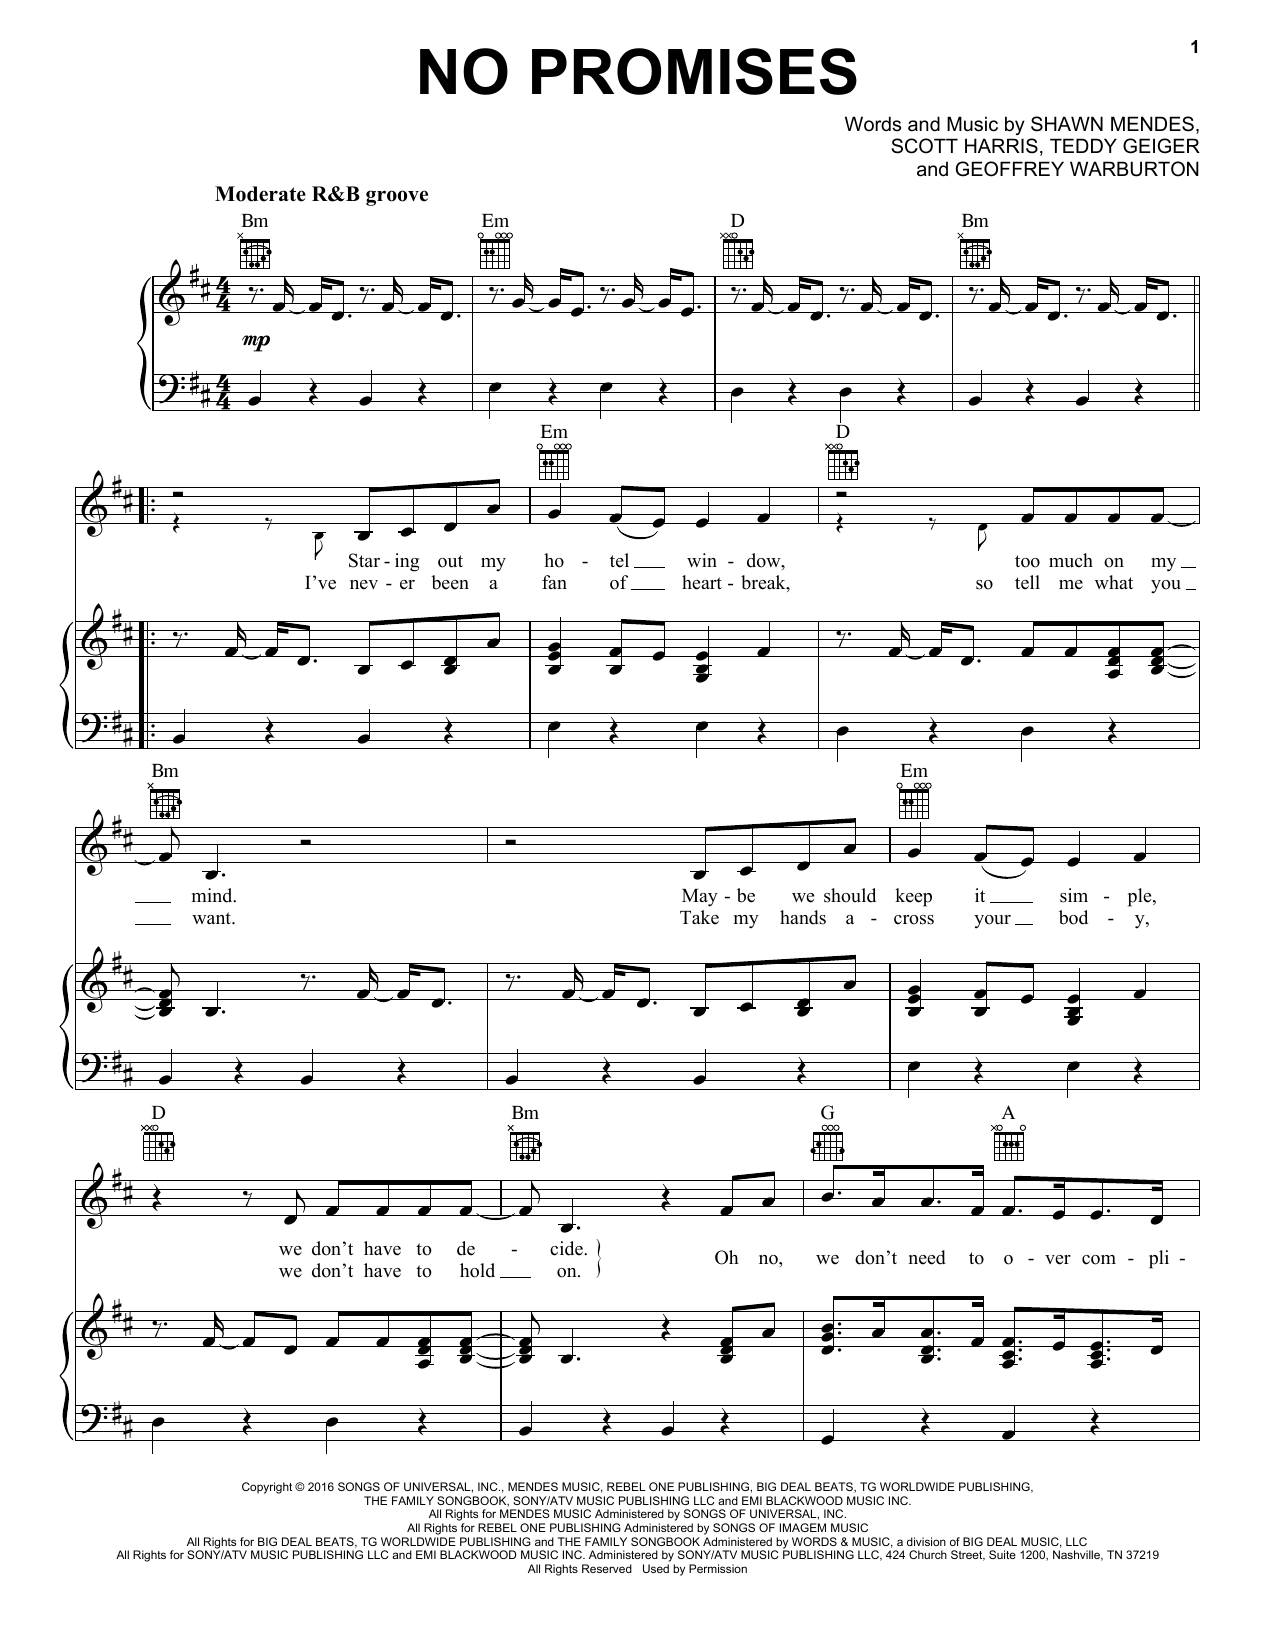 Download Shawn Mendes No Promises Sheet Music